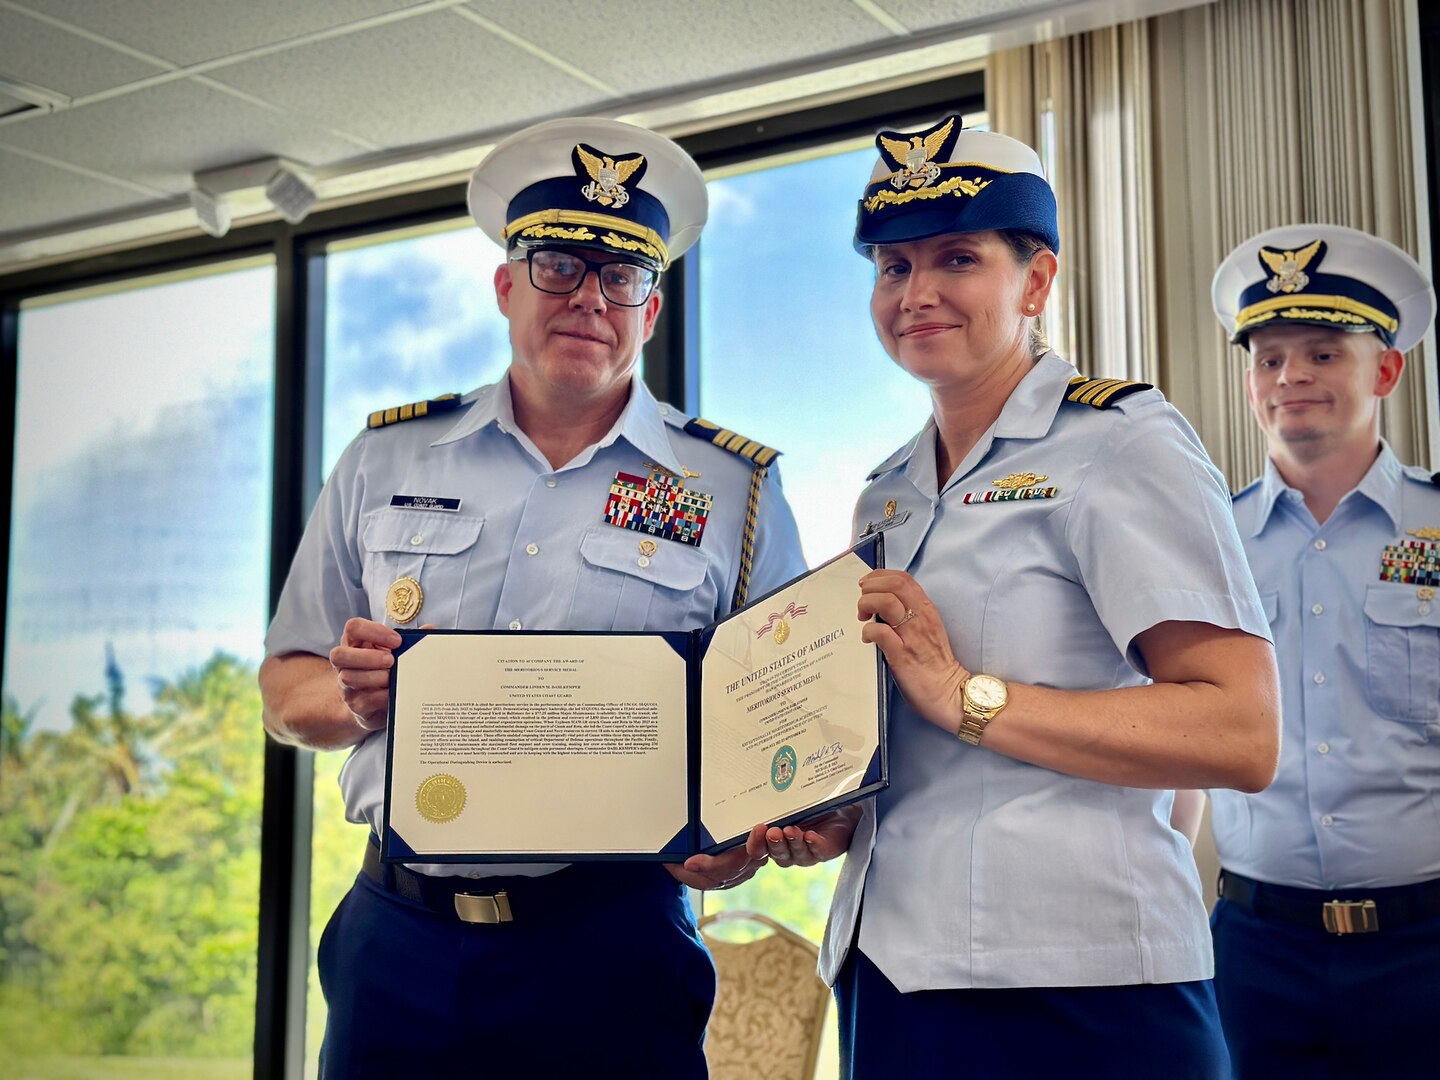 Capt. Blake Novak, chief of staff U.S. Coast Guard 14th District, presents Cmdr. Linden Dahlkemper with a U.S. Coast Guard Meritorious Service Medal for her work aboard USCGC Sequoia (WLB 215) during a change of command ceremony held at the Top o’the Mar in Guam on Wednesday, Sep. 13, 2023. The ceremony also signaled the official shift of the 225-foot seagoing buoy tender in Guam from USCGC Sequoia (WLB 215), currently at its major maintenance availability (MMA) at the U.S. Coast Guard Yard in Baltimore, to USCGC Hickory, which is just completing MMA and will now serve the Western Pacific. (U.S. Coast Guard photo by Chief Warrant Officer Sara Muir)